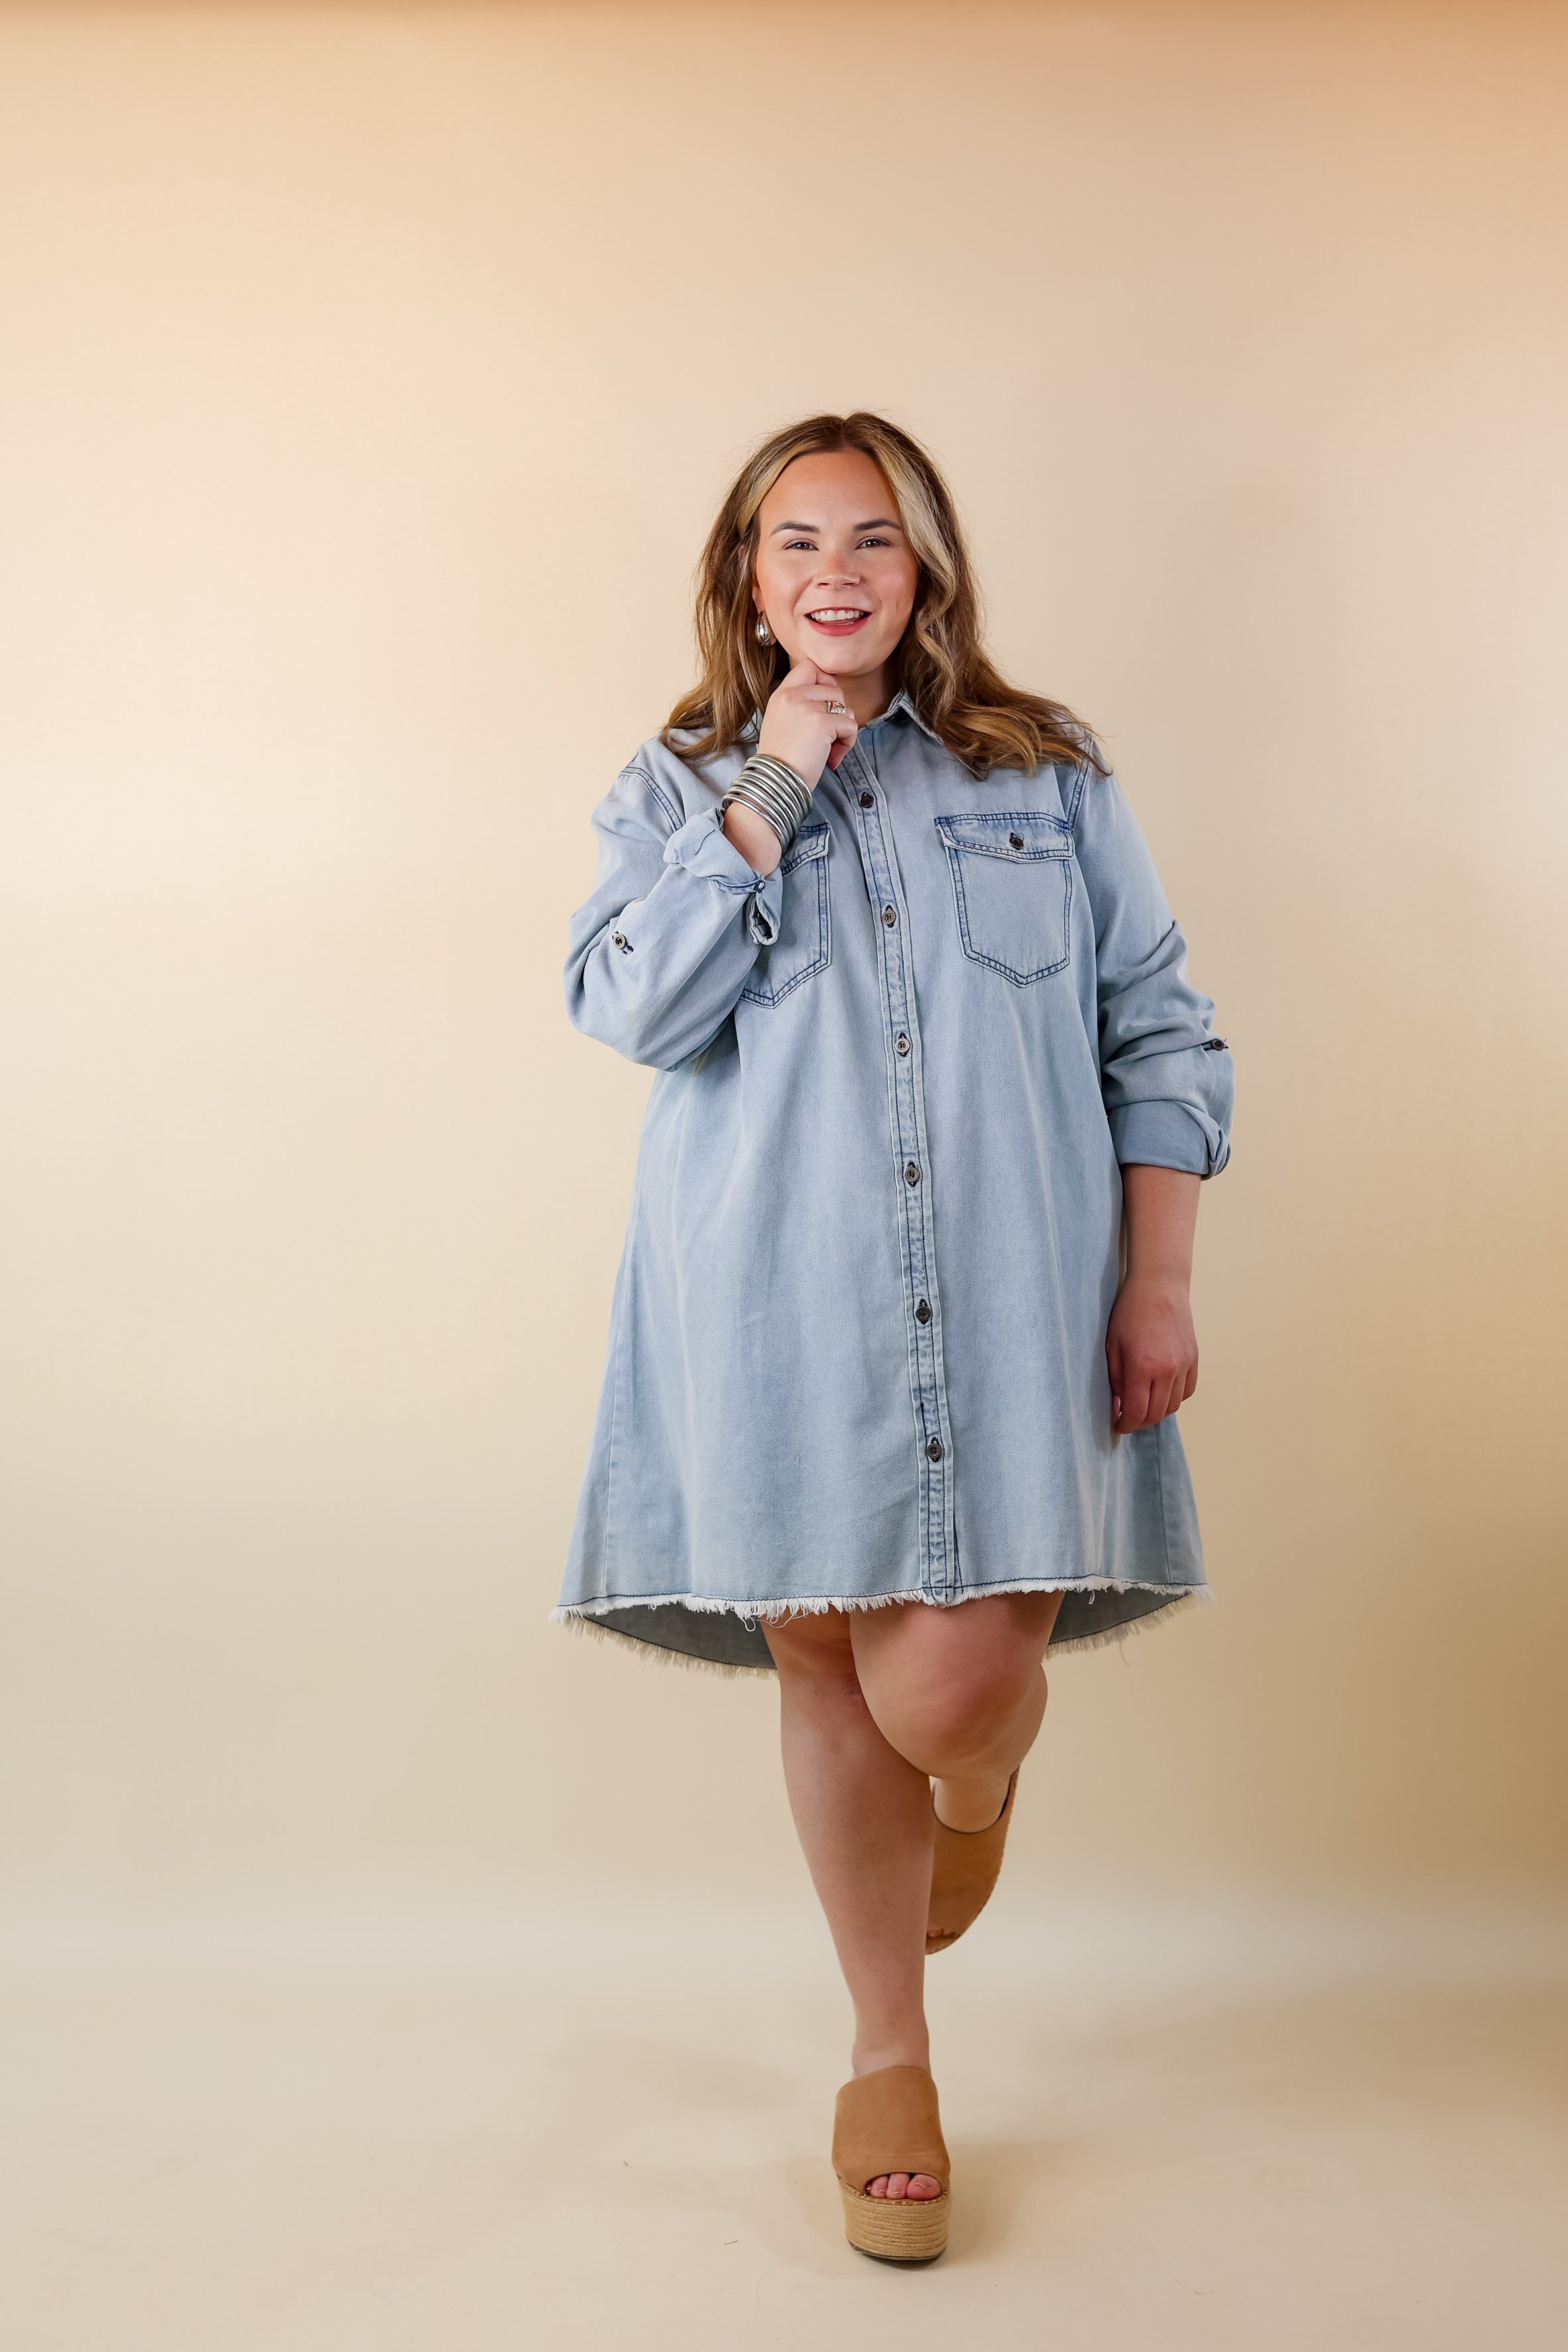 Patio Date Button Up Long Sleeve Denim Dress in Light Wash - Giddy Up Glamour Boutique